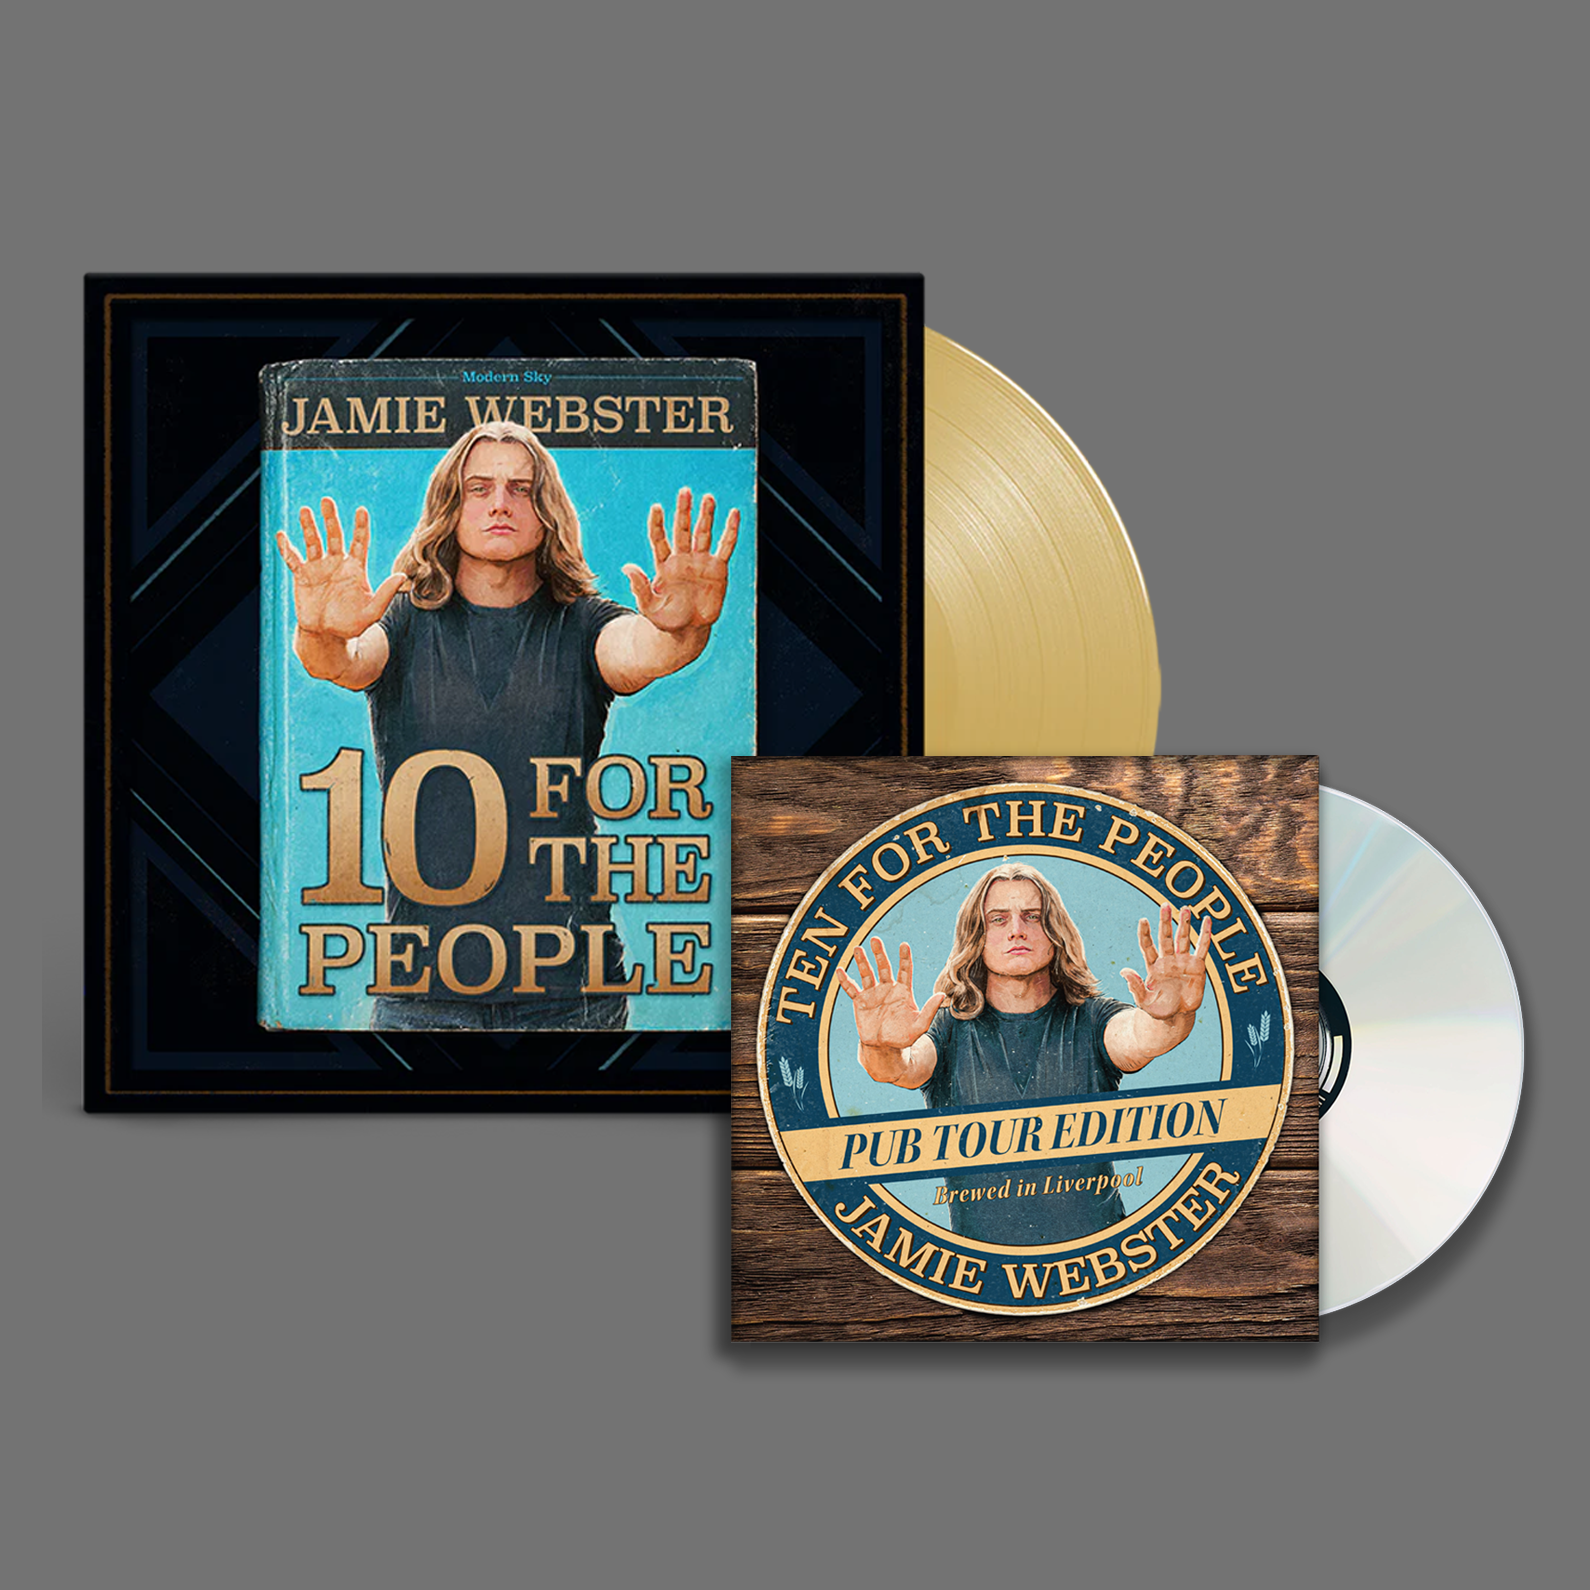 10 For The People: Signed Gold Vinyl LP + Exclusive Pub Tour Edition CD